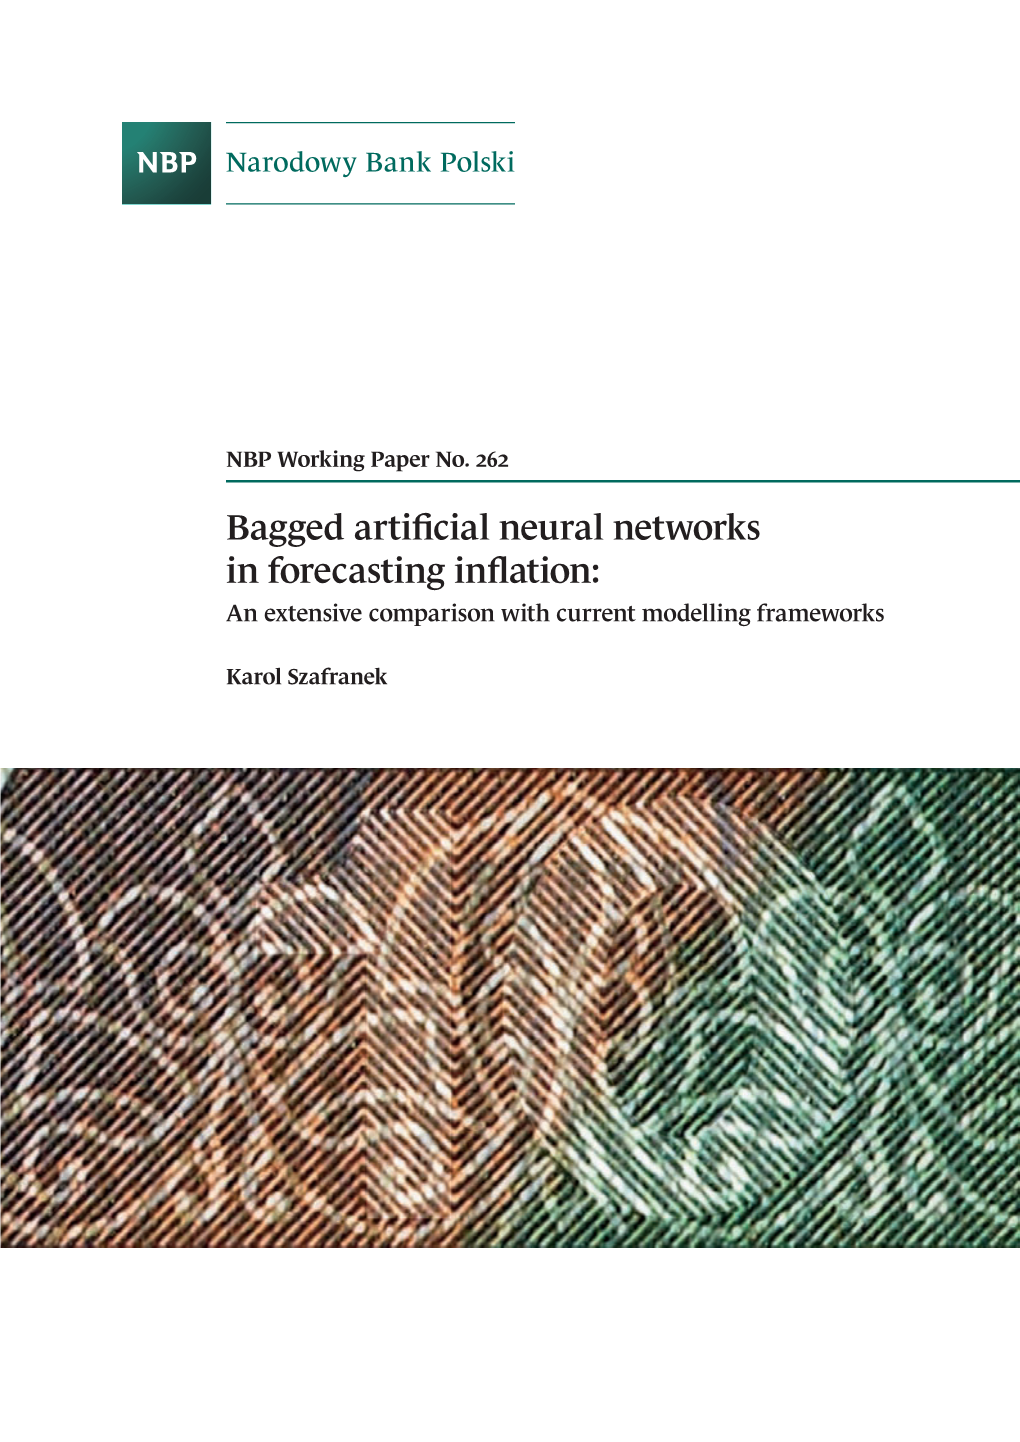 Bagged Artificial Neural Networks in Forecasting Inflation: an Extensive Comparison with Current Modelling Frameworks